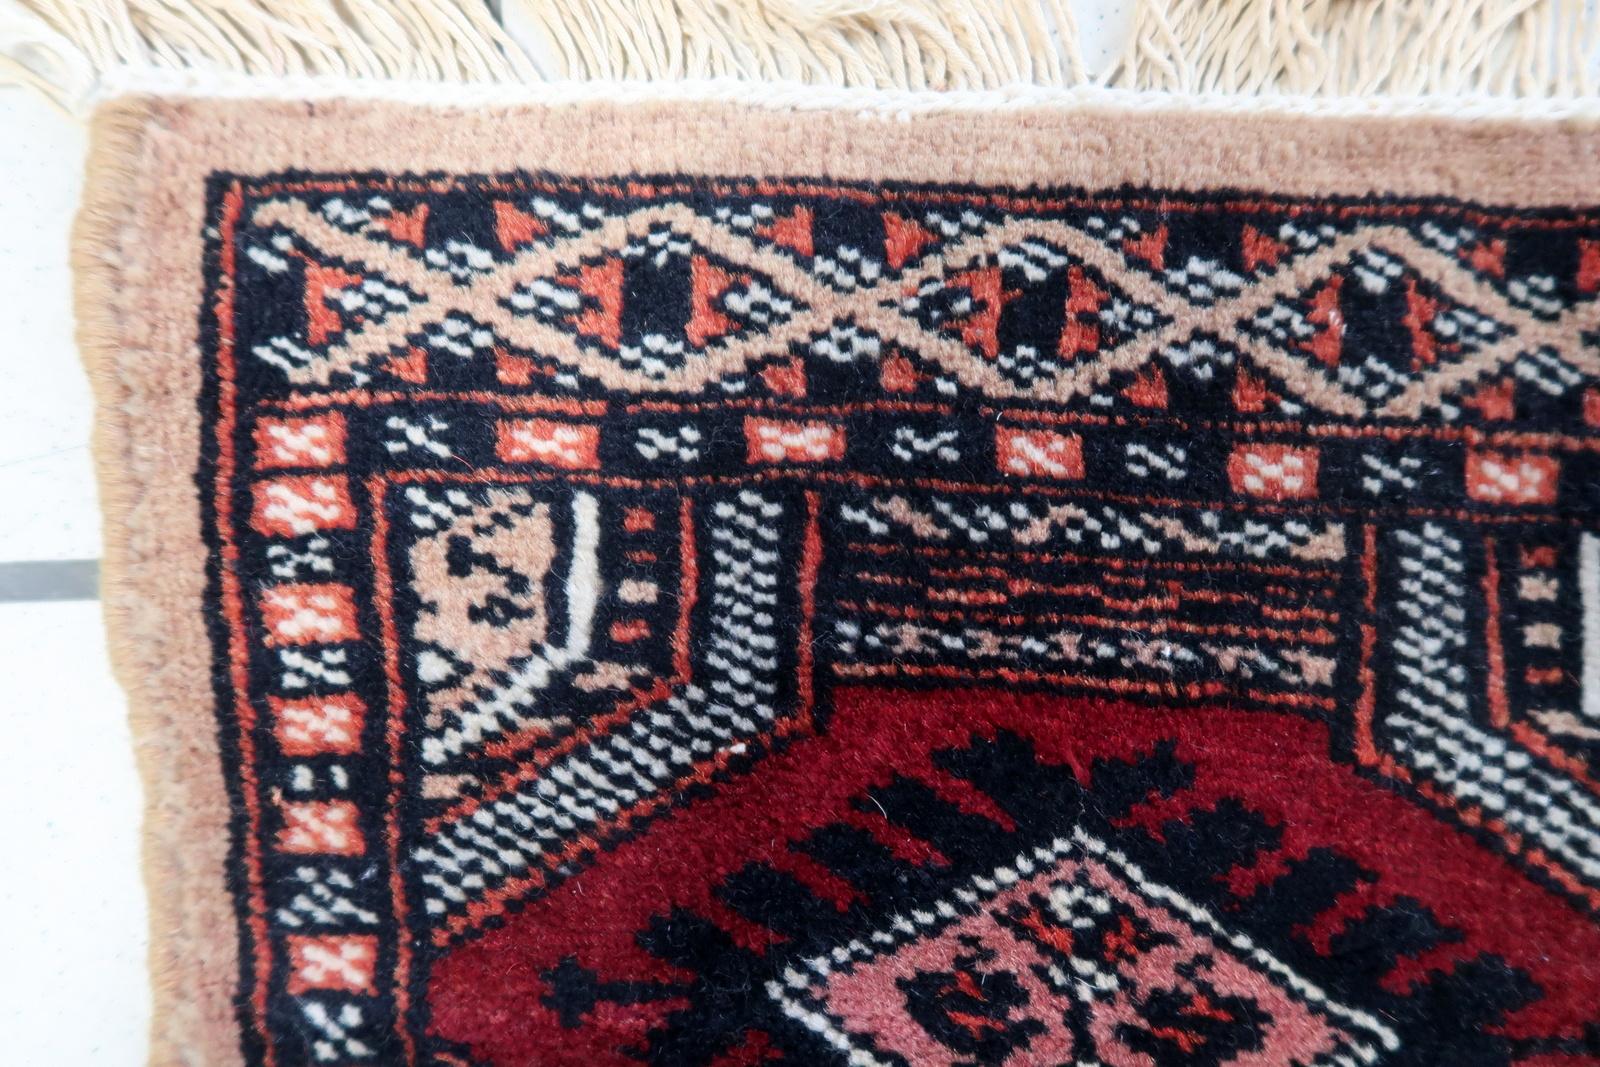 Handmade Vintage Uzbek Bukhara Mat Rug:

Design and Colors:
This square-shaped rug showcases intricate craftsmanship.
The dominant colors include:
Deep Reds: These warm tones evoke a sense of tradition and spirituality.
Blacks: Adding contrast and